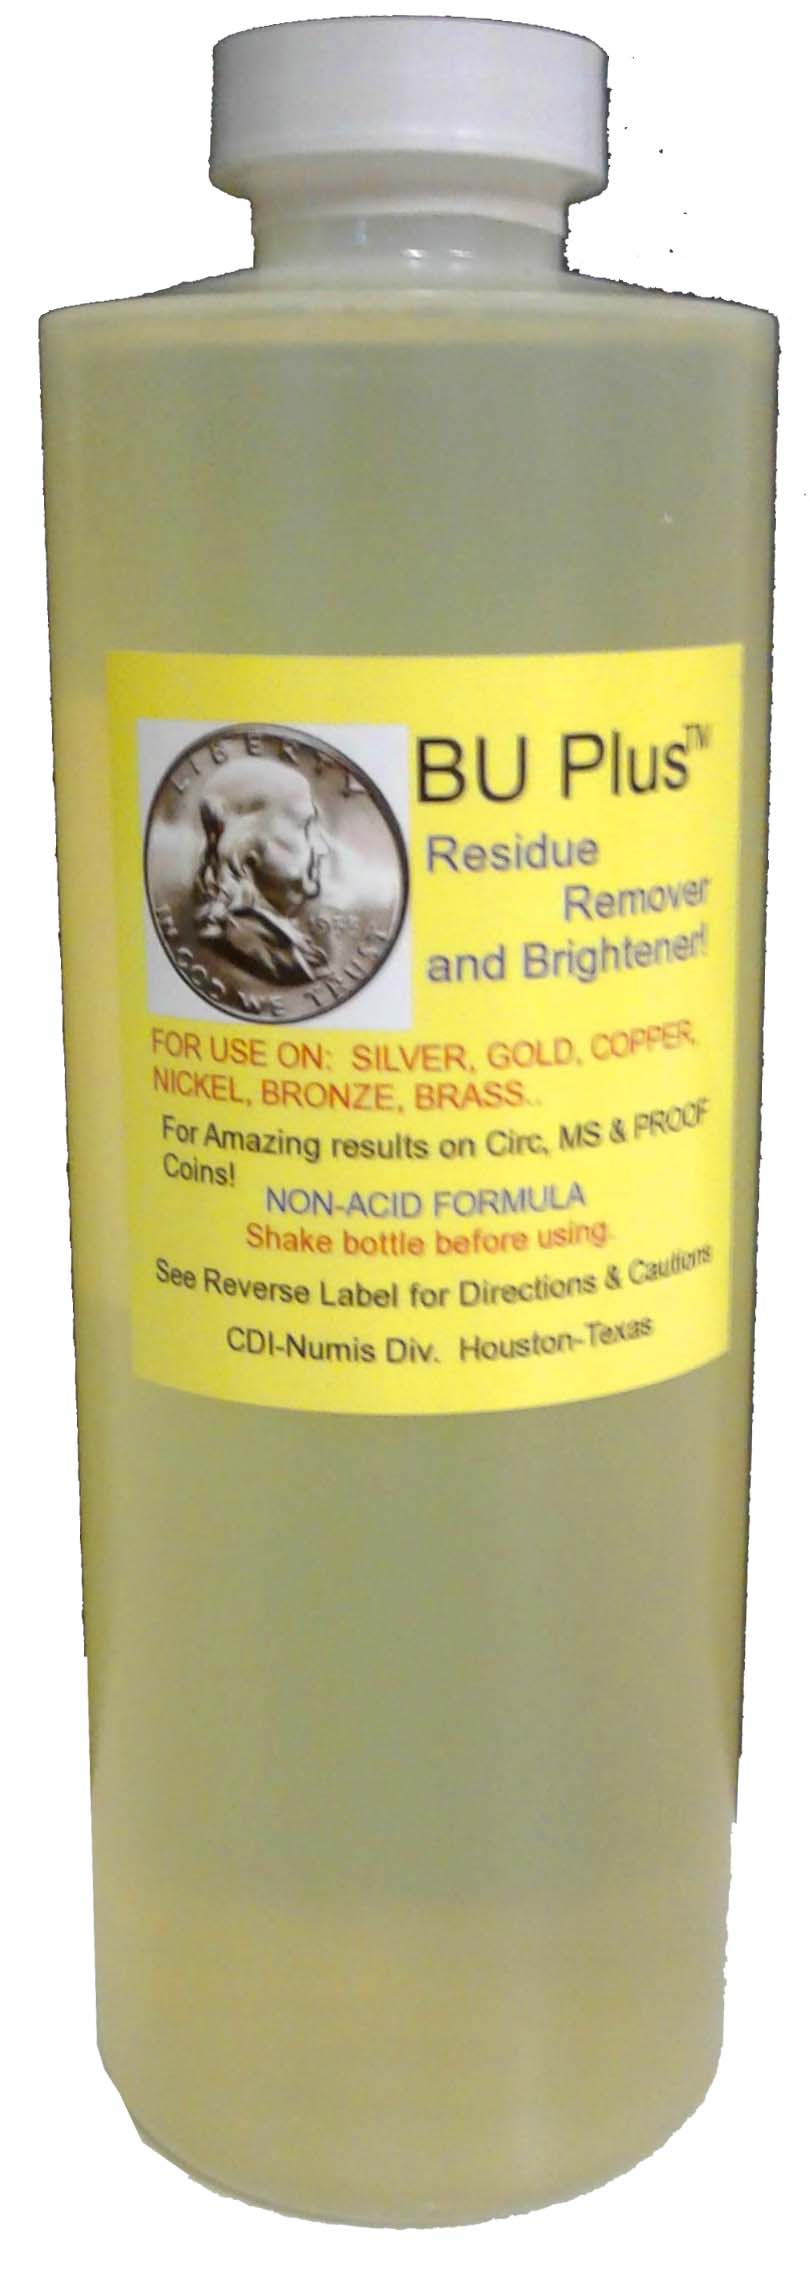 Coin Cleaning Duo - One BU Plus Coin and Relic Residue Remover and  Brightener 4 oz. Bottle and One Conserv Safe Coin Cleaning Solvent